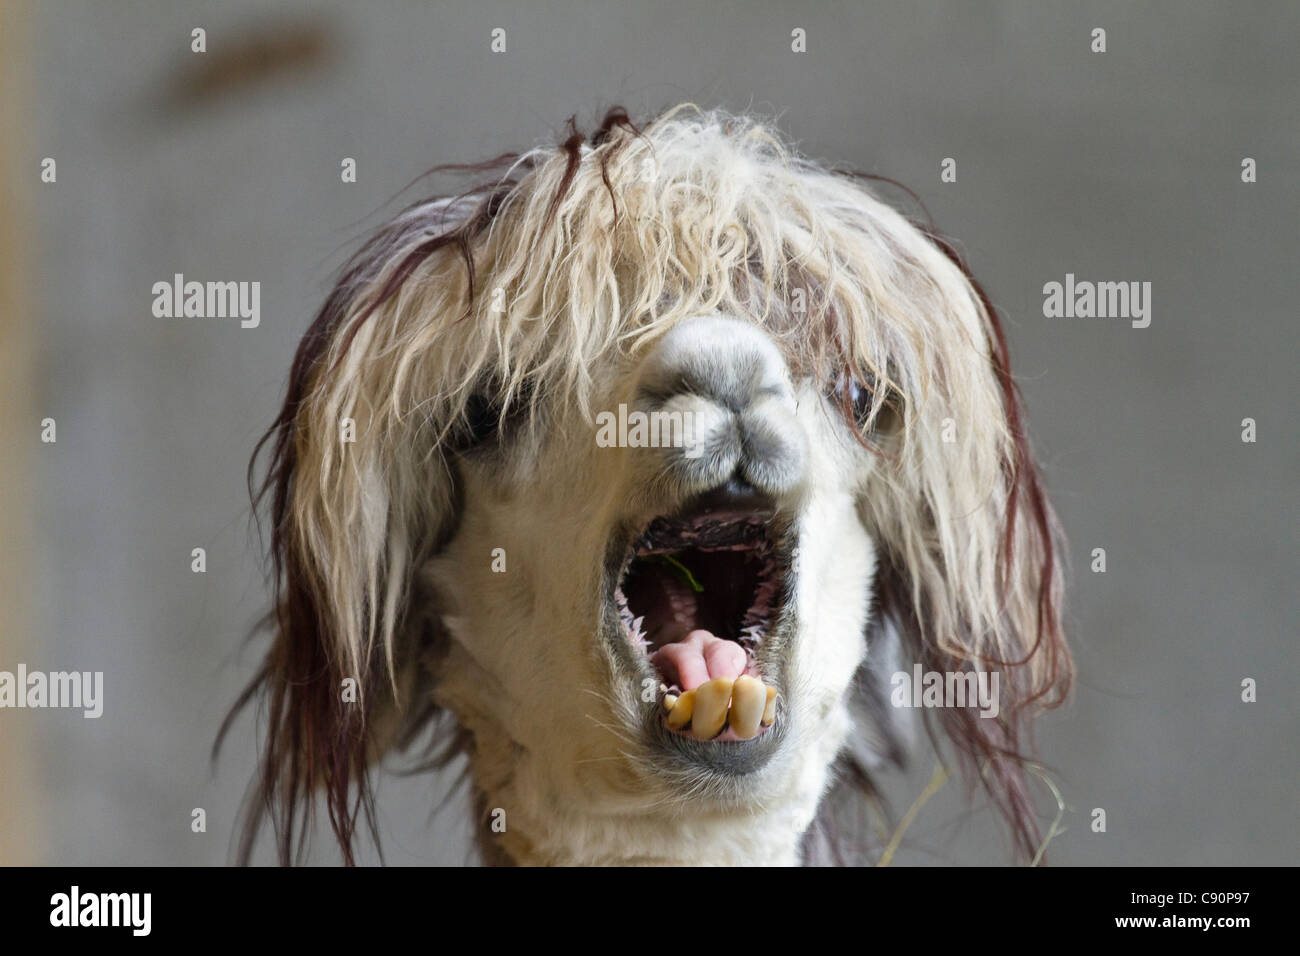 Lama pacos, alpaca with funny hairstyle in a zoo, Andes, South America, America Stock Photo